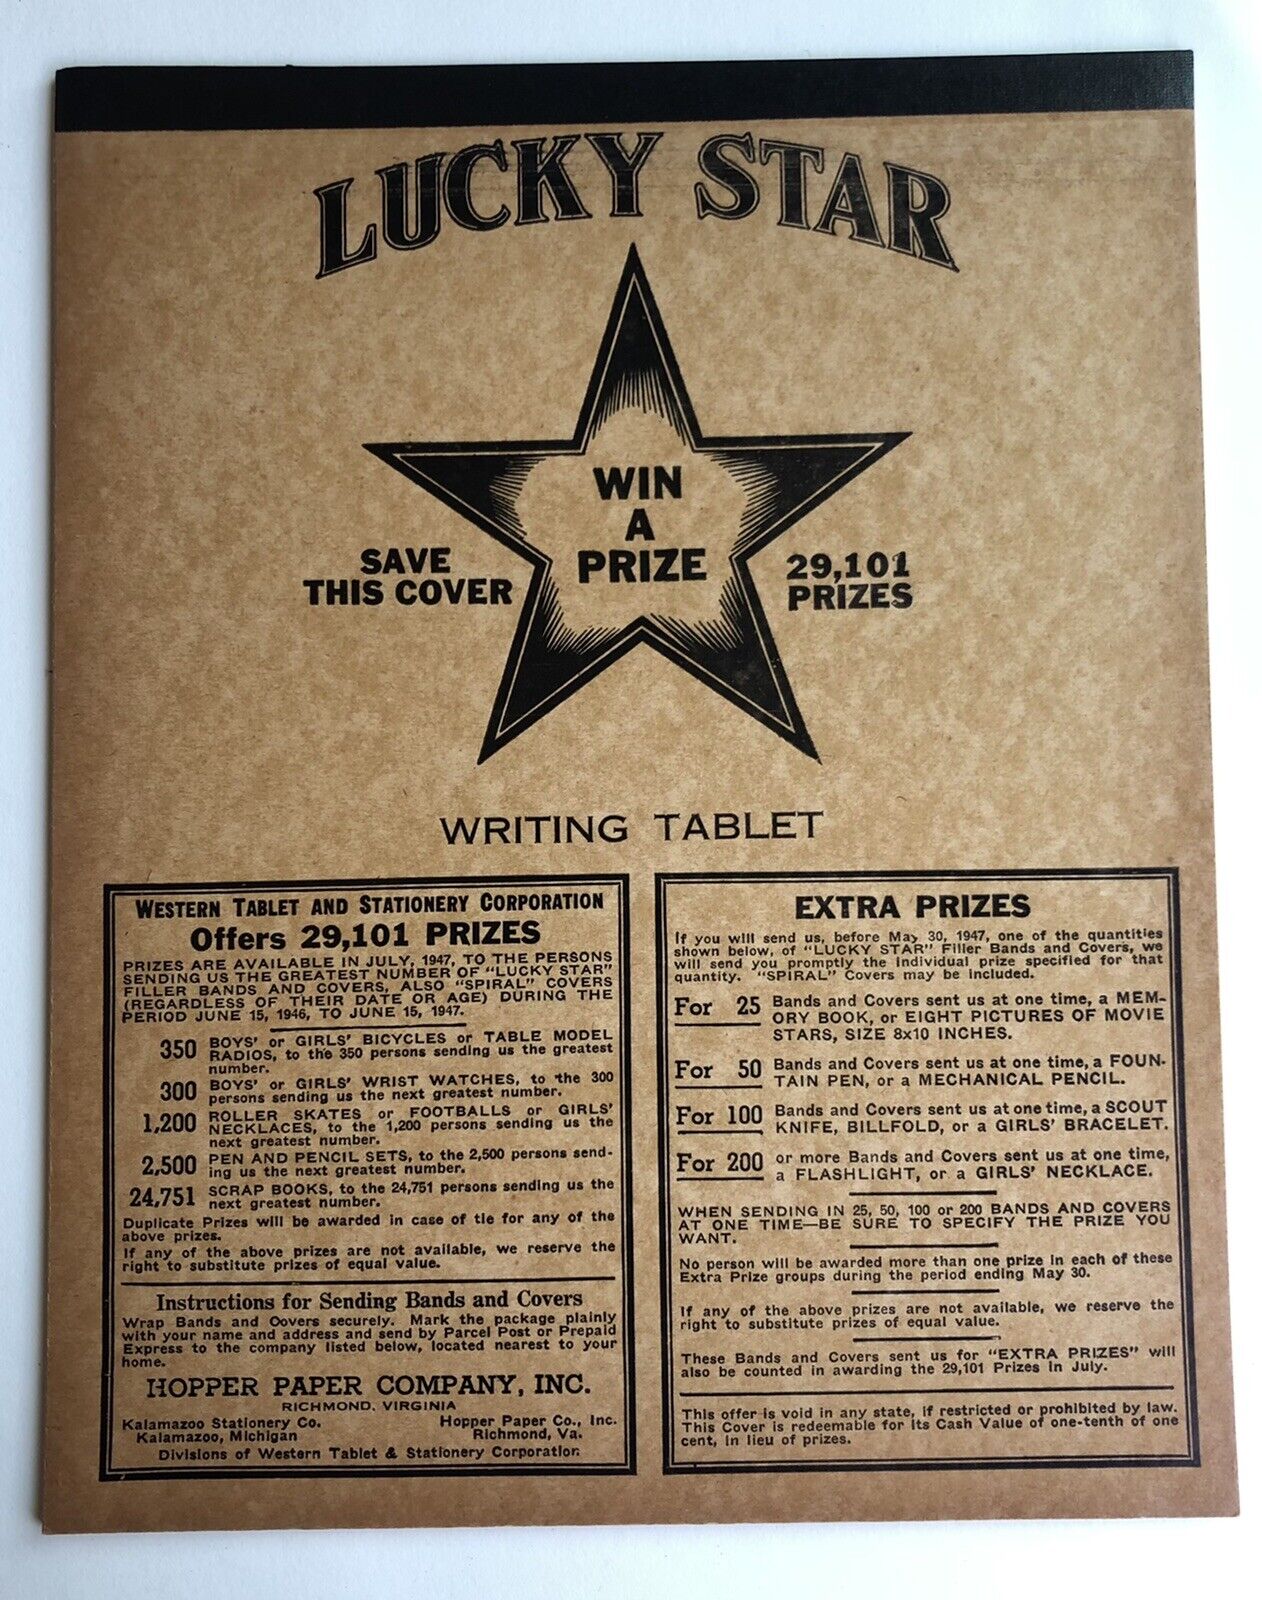 Vintage LUCKY STAR Lined Paper Notebook NOS 14 Pages Western Tablet Co 1940s USA